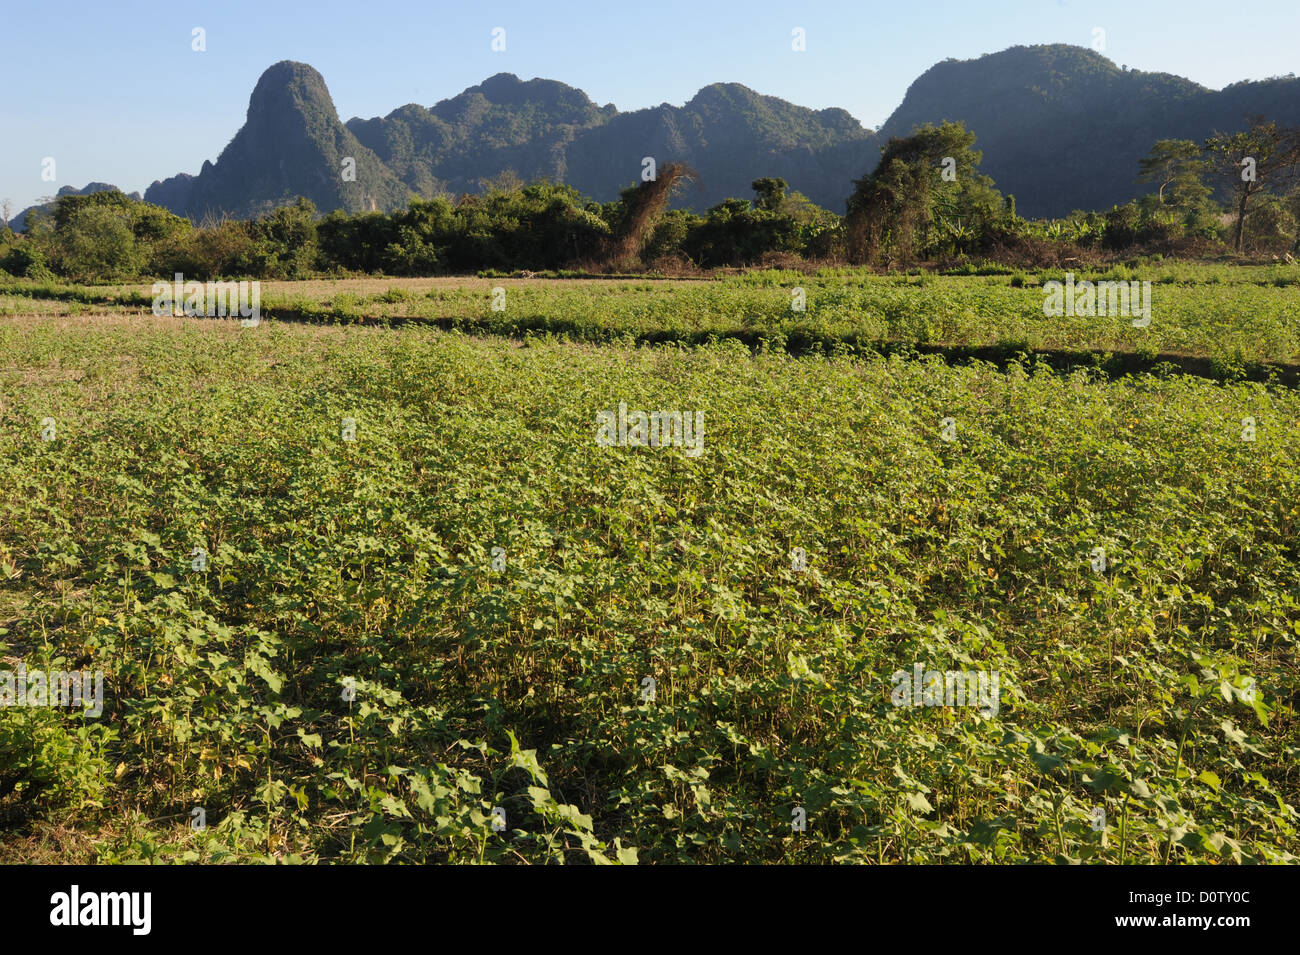 Laos, Asia, Vang Vieng, mountains, scenery, landscape, agriculture, field Stock Photo